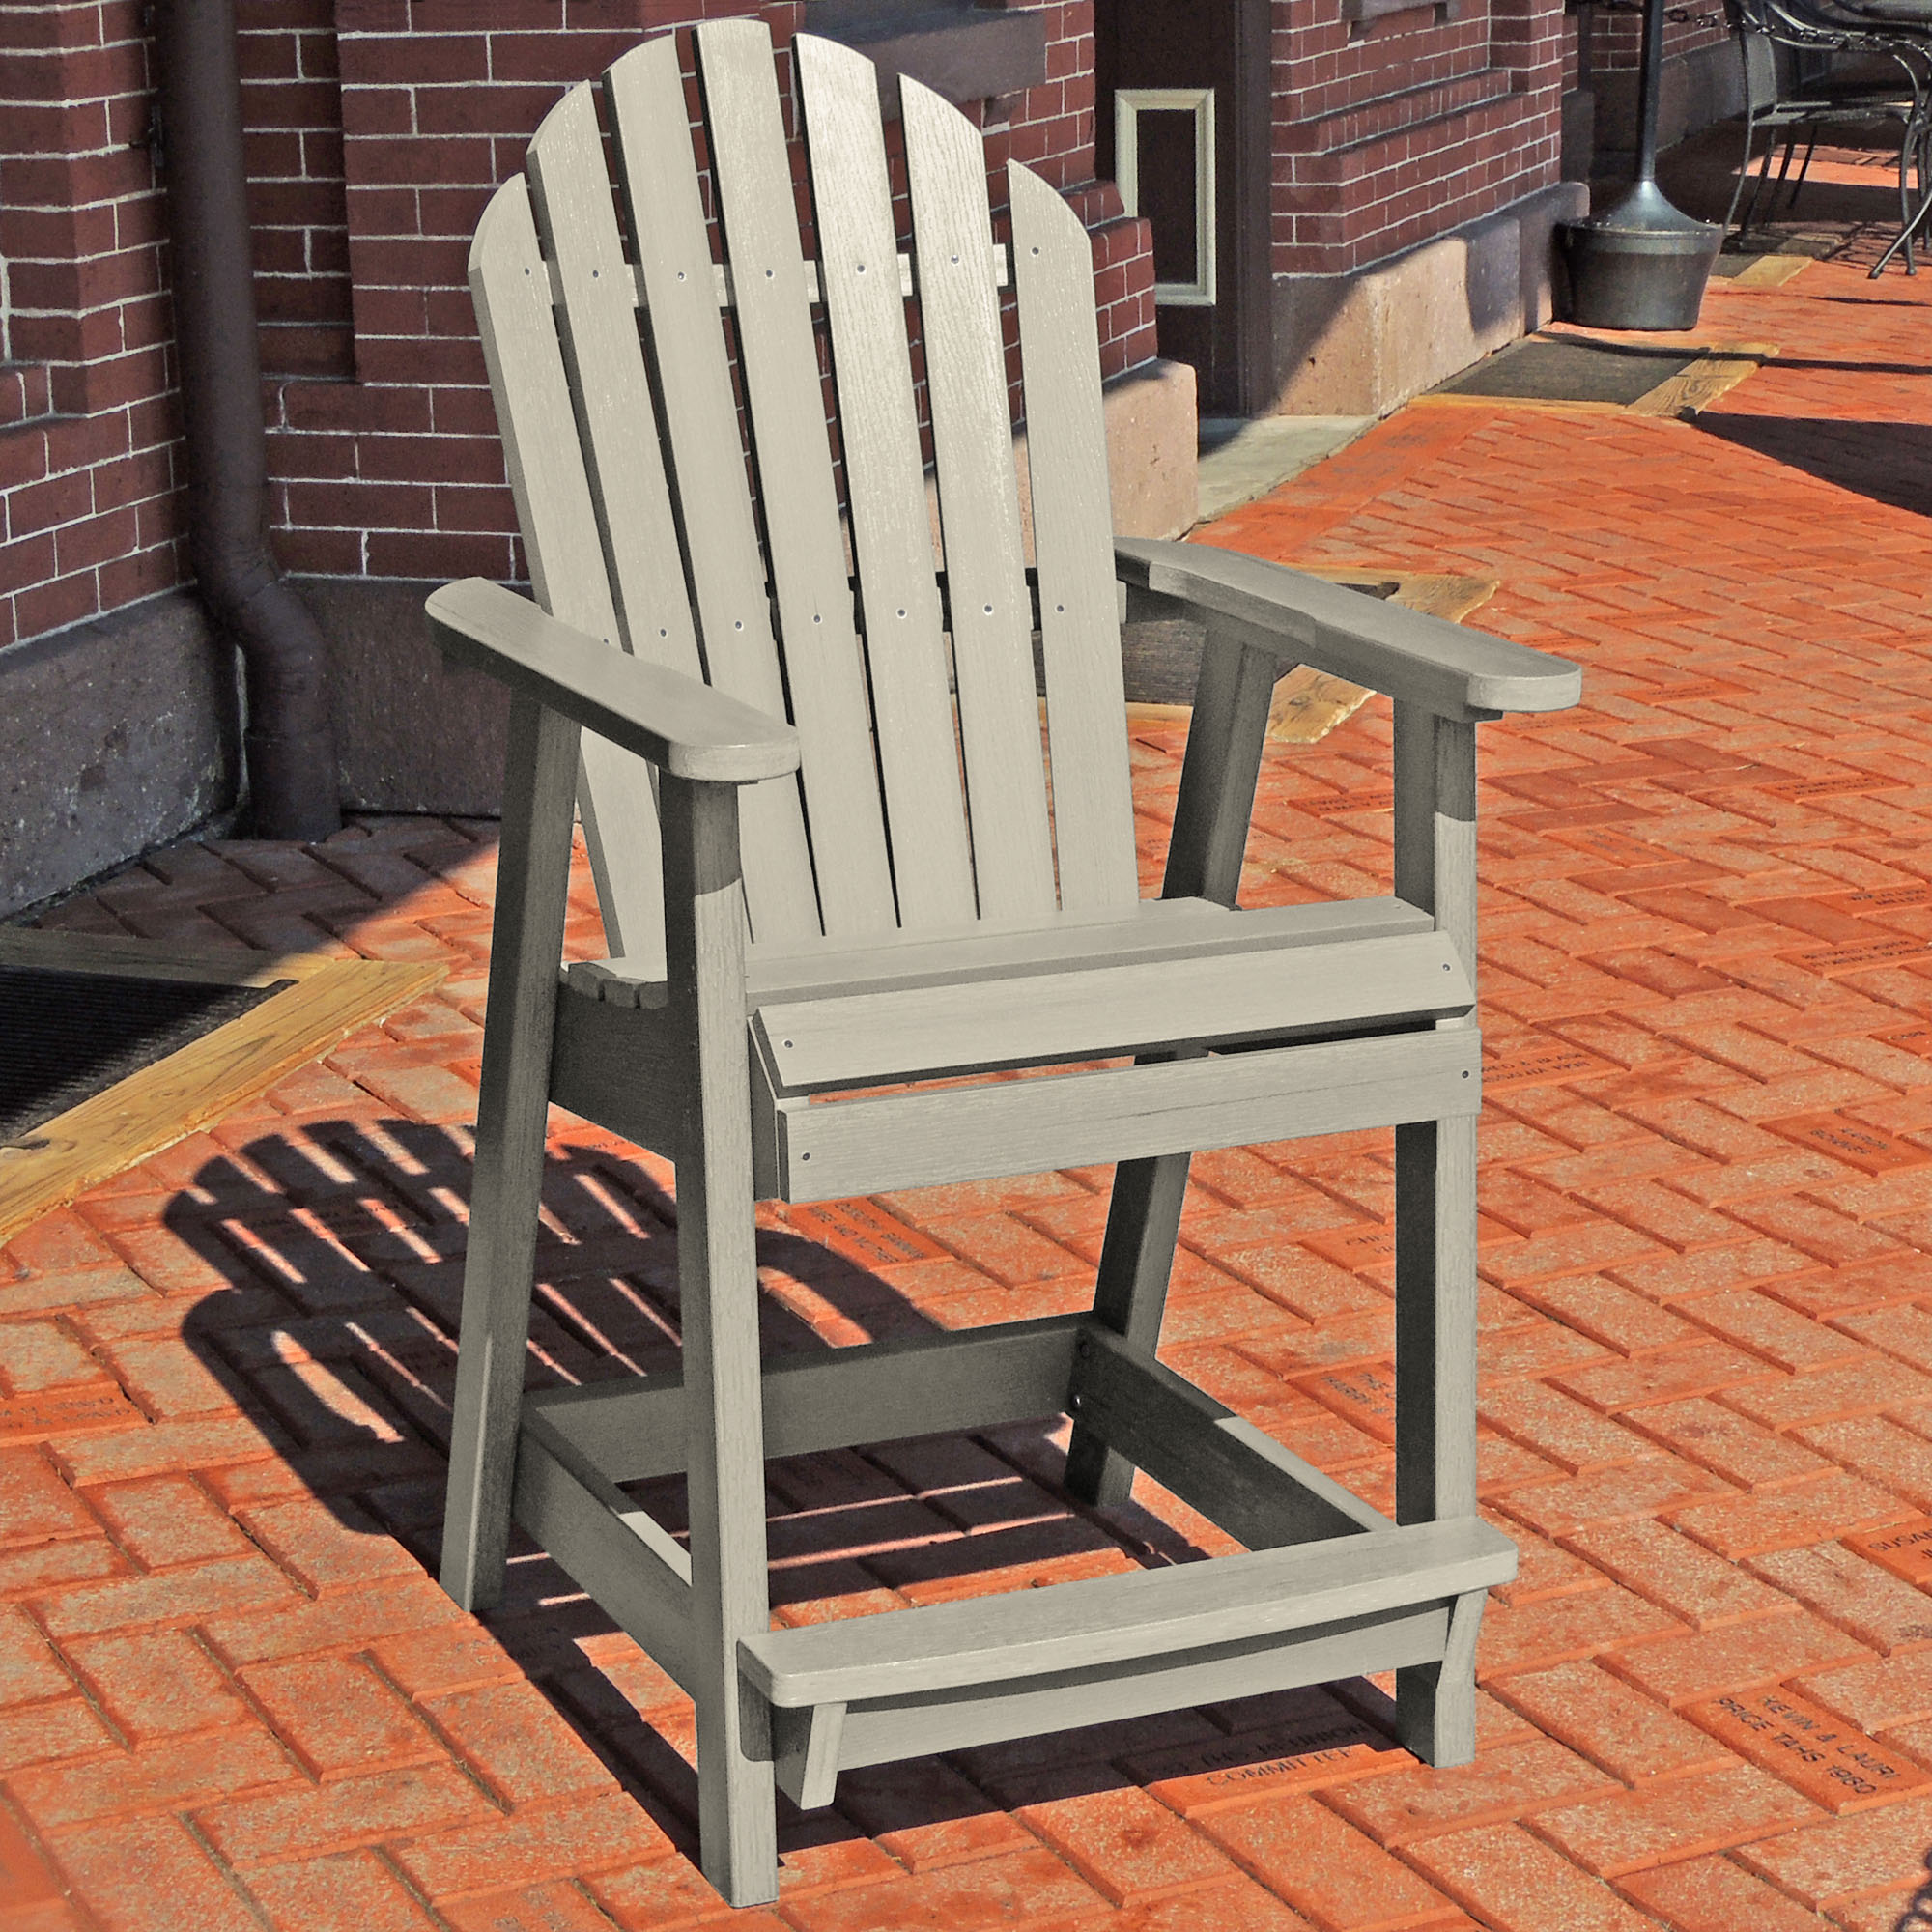 The Sequoia Professional Commercial Grade Muskoka Adirondack Deck Dining Chair in Counter Height - image 2 of 2